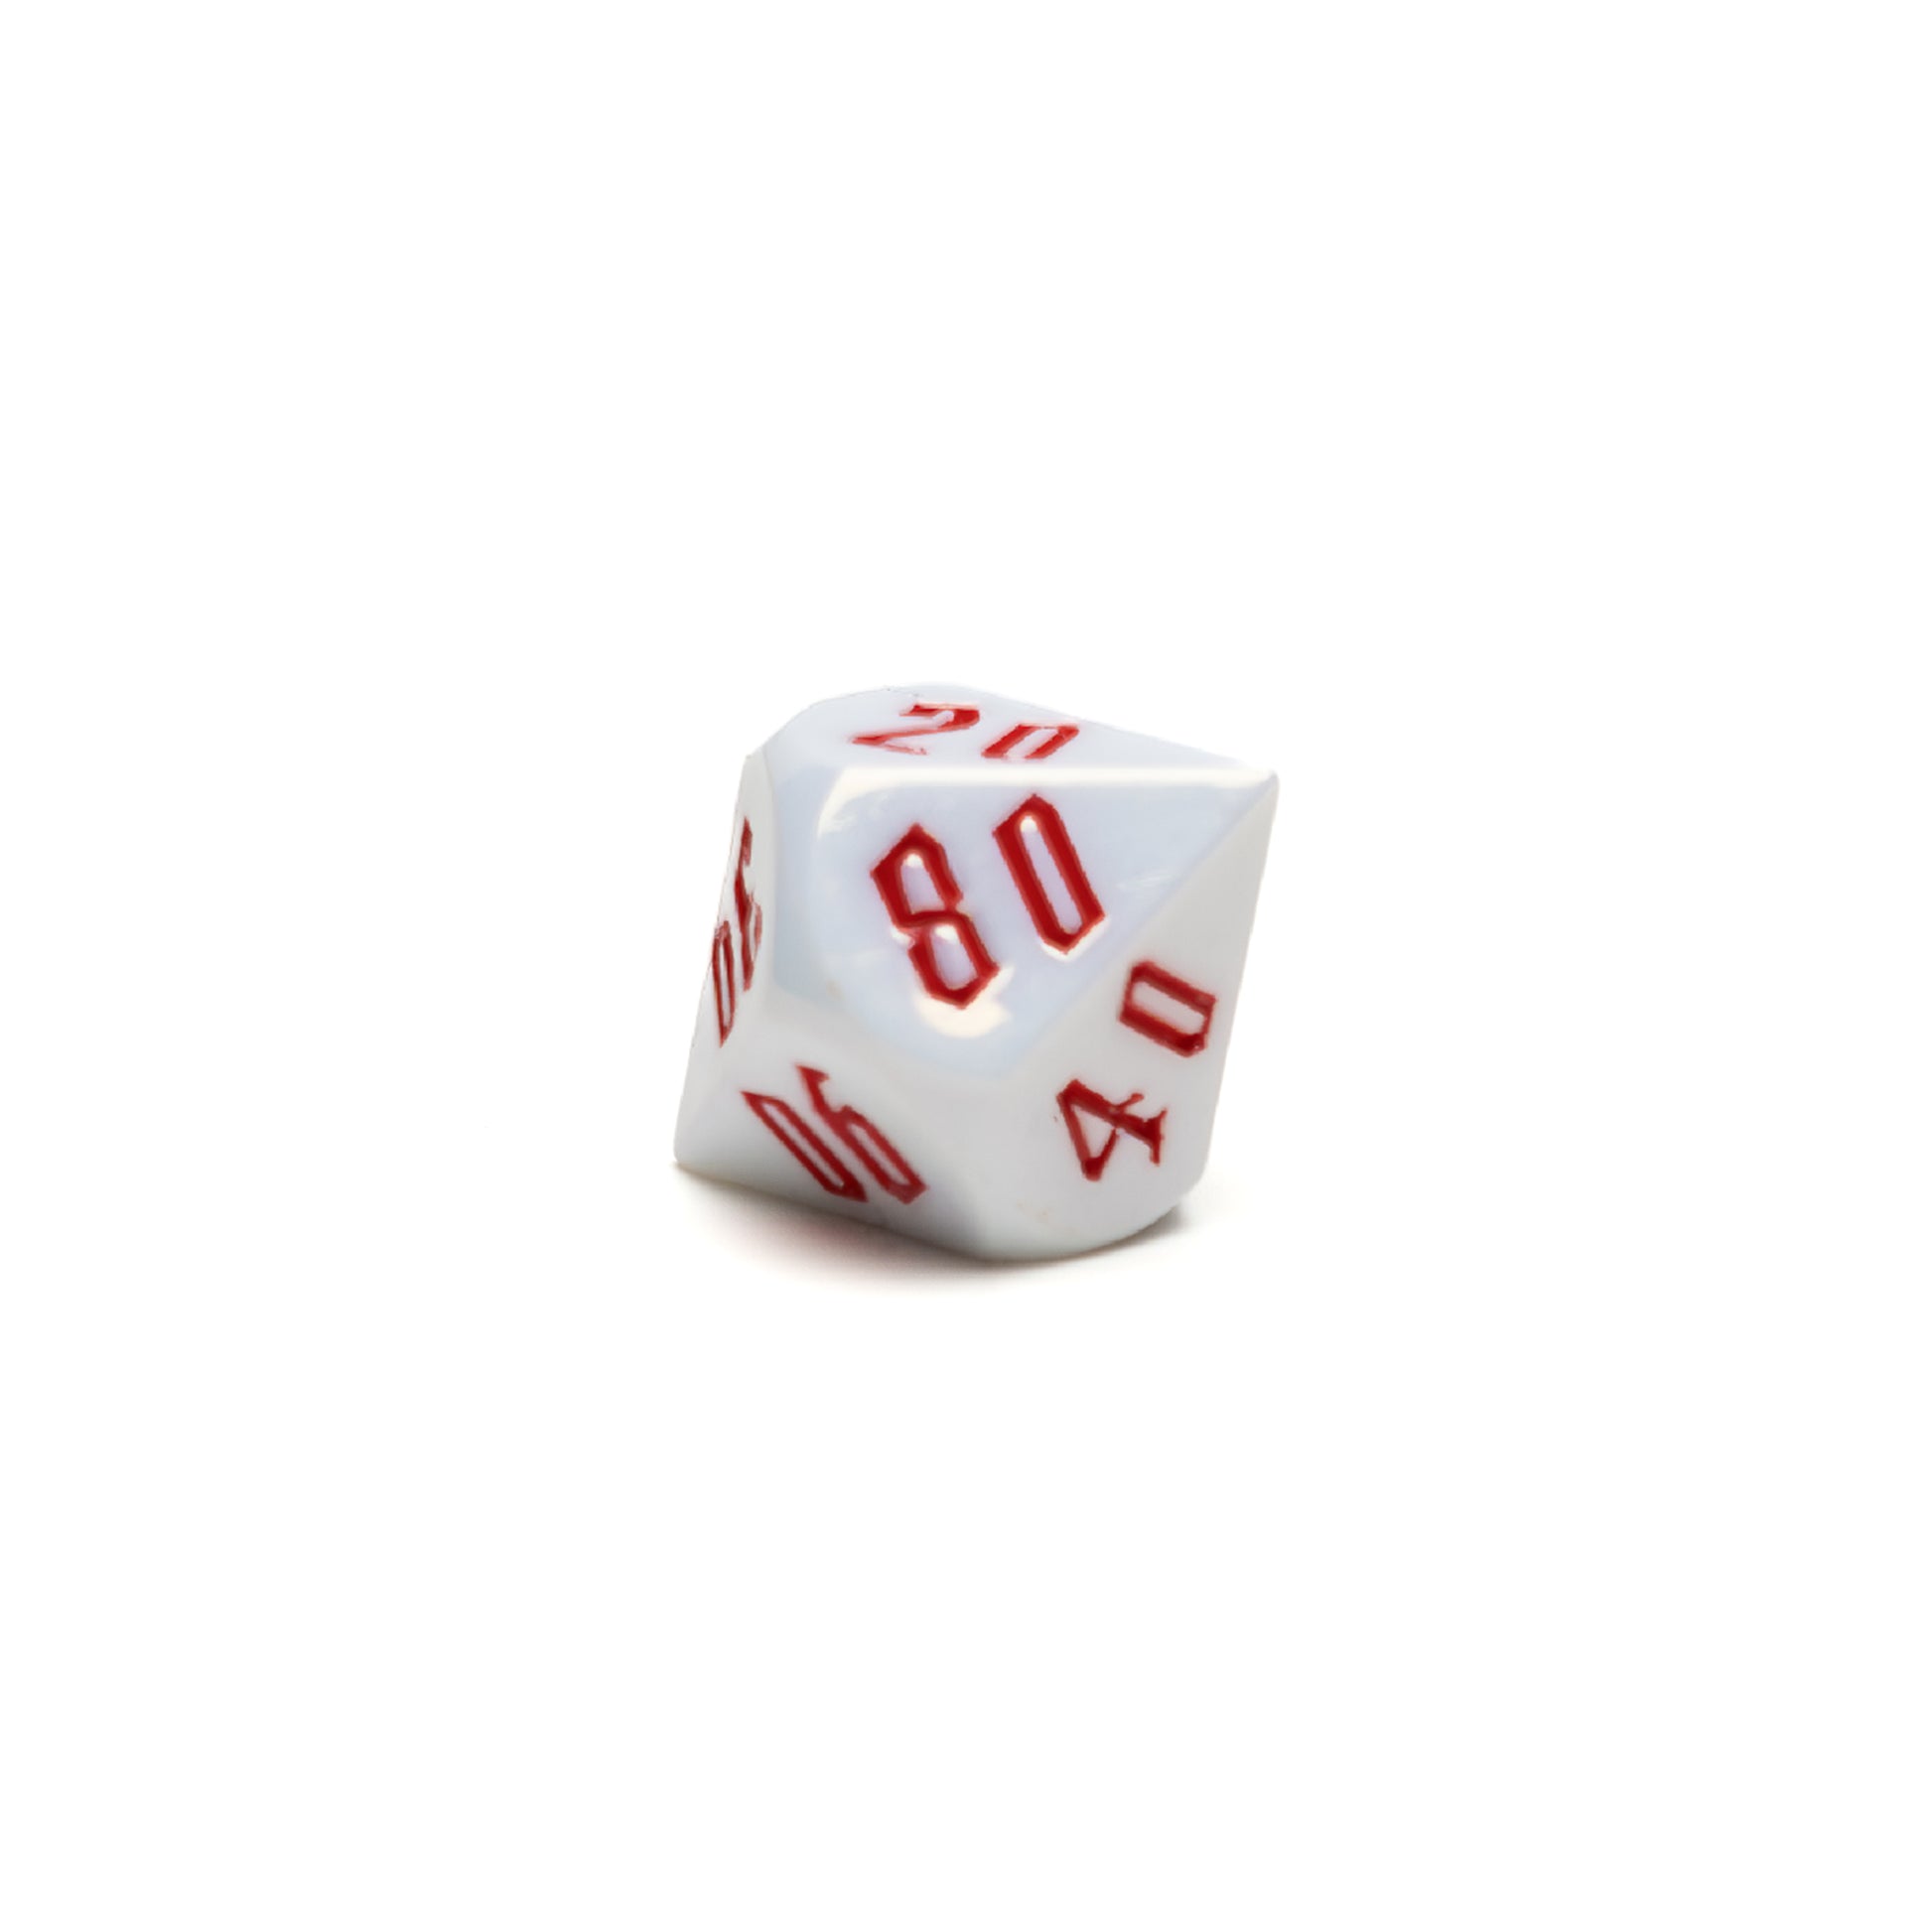 Roll Britannia Royal Guard Sharp Edged Electroplating Dungeons and Dragons D10 Percentile Dice with Red and White Aesthetic